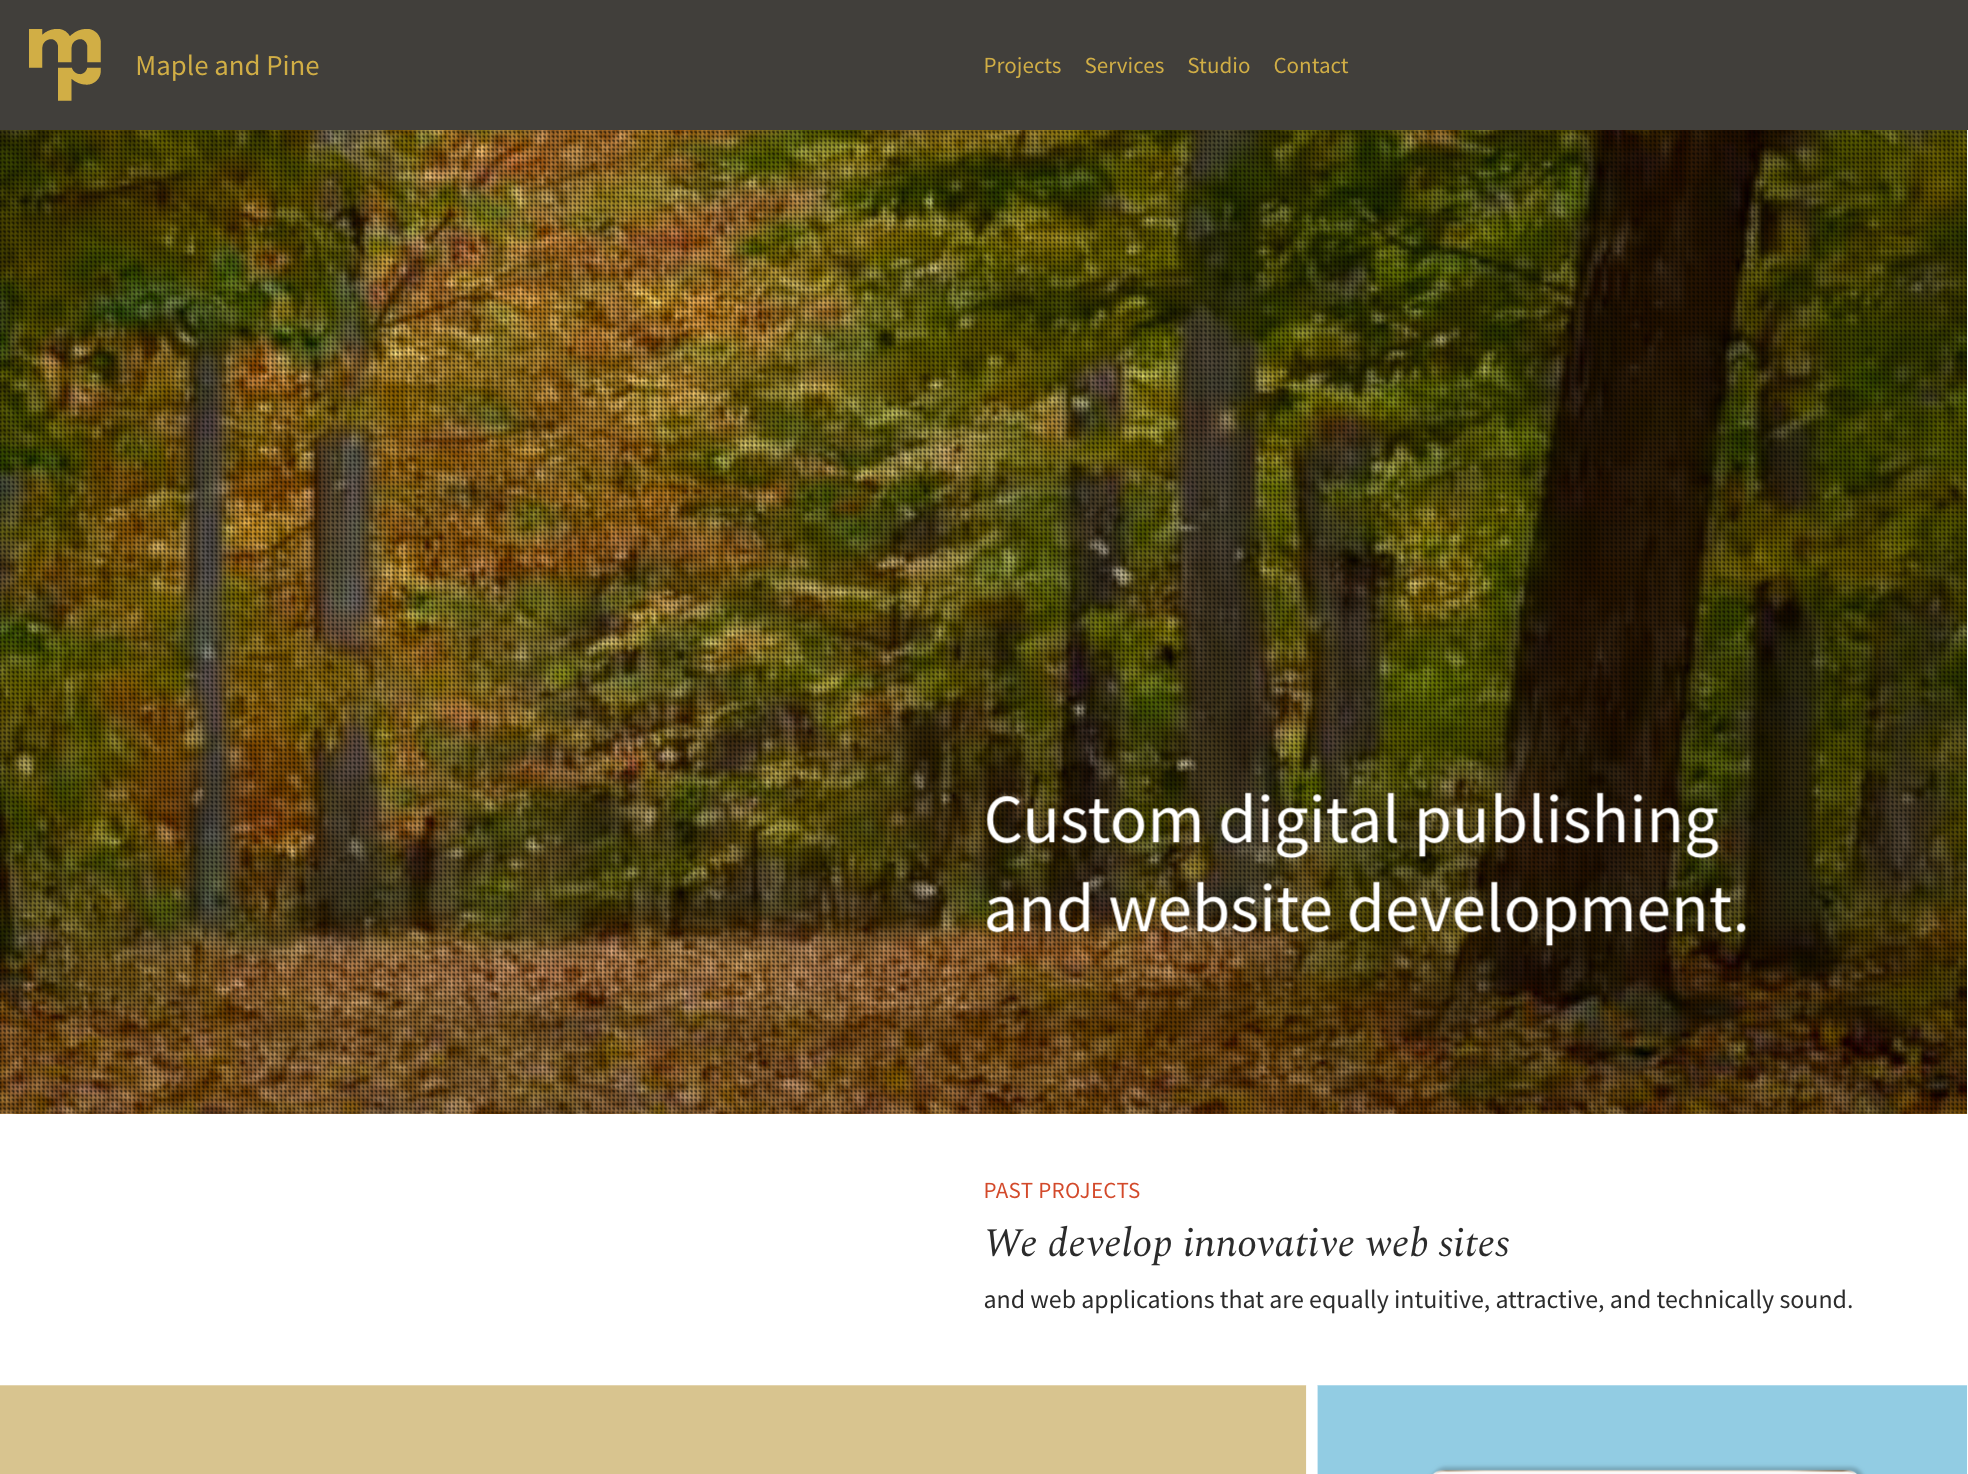 Maple and Pine home page